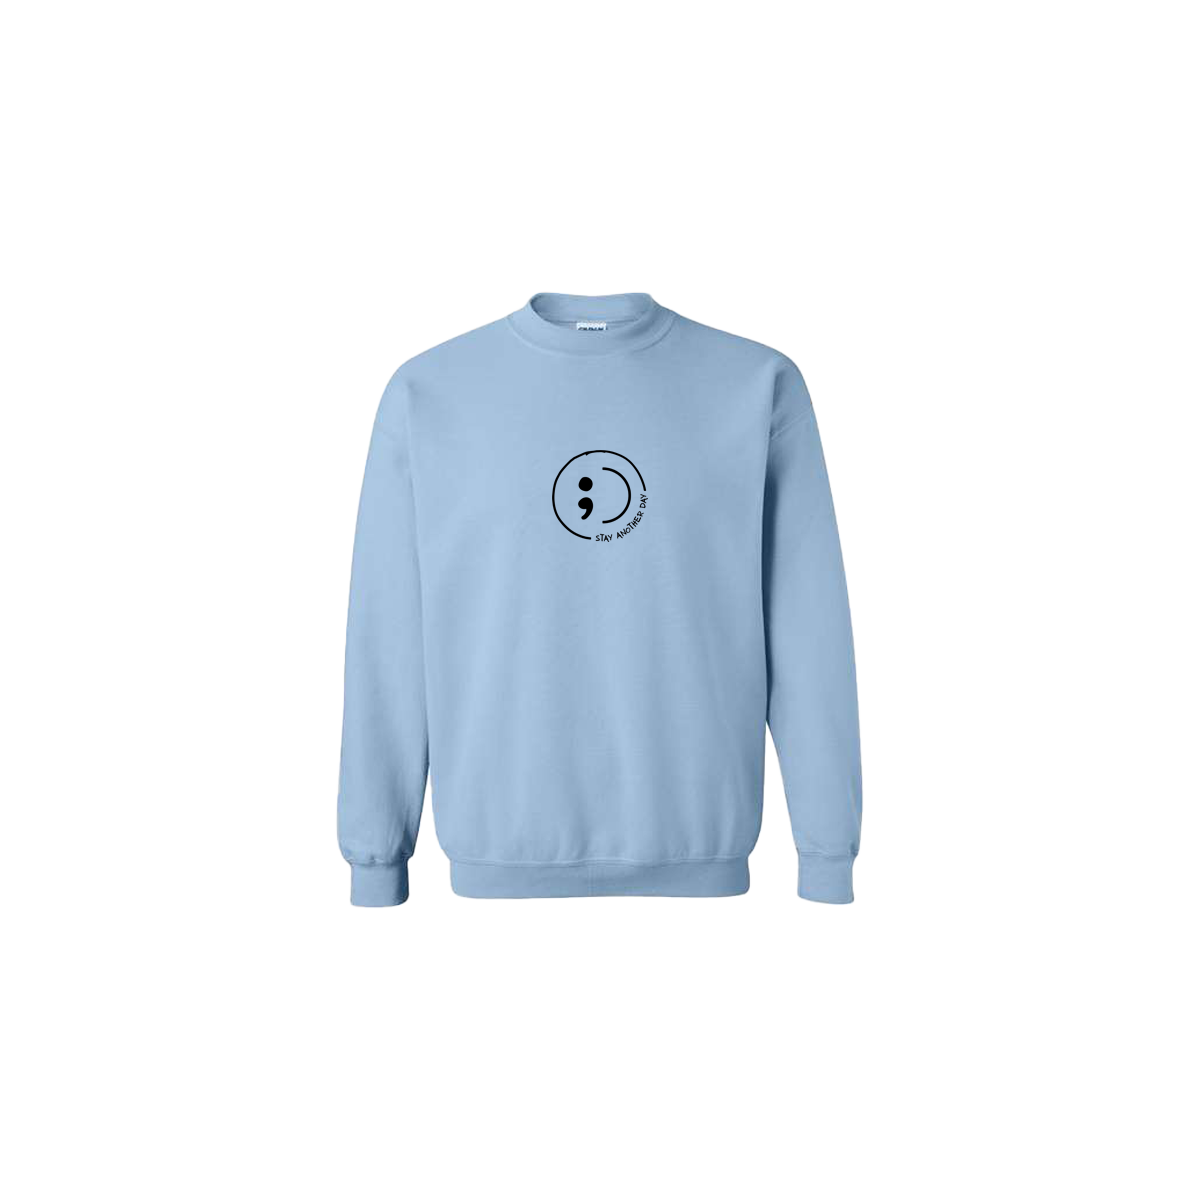 Stay Another Day Smiley with text Embroidered Light Blue Crewneck - Mental Health Awareness Clothing